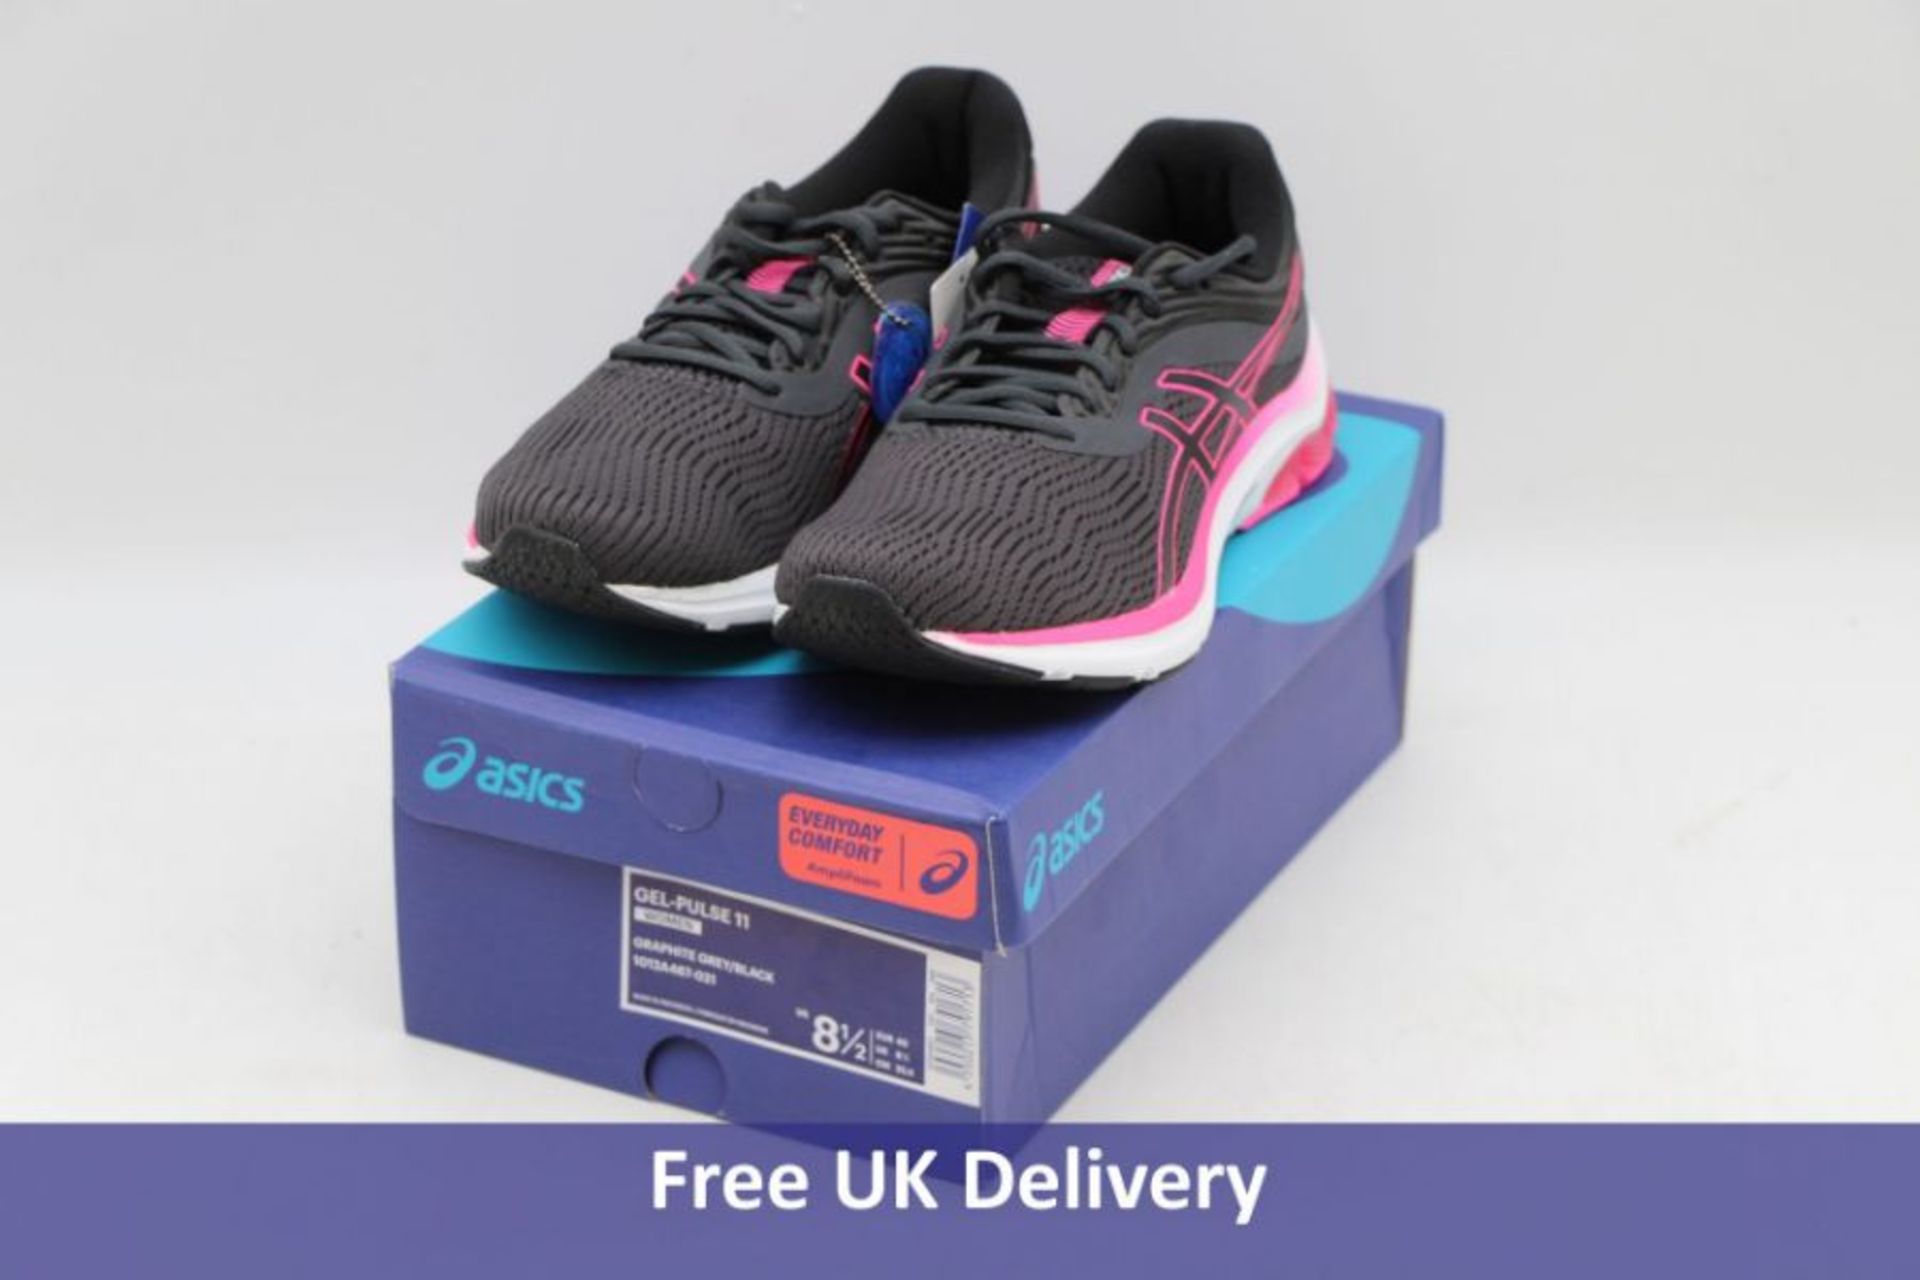 Two Asics Gel-Pulse 11 Women's Trainers, Graphite Grey/Black, UK 6.5 - Image 2 of 2